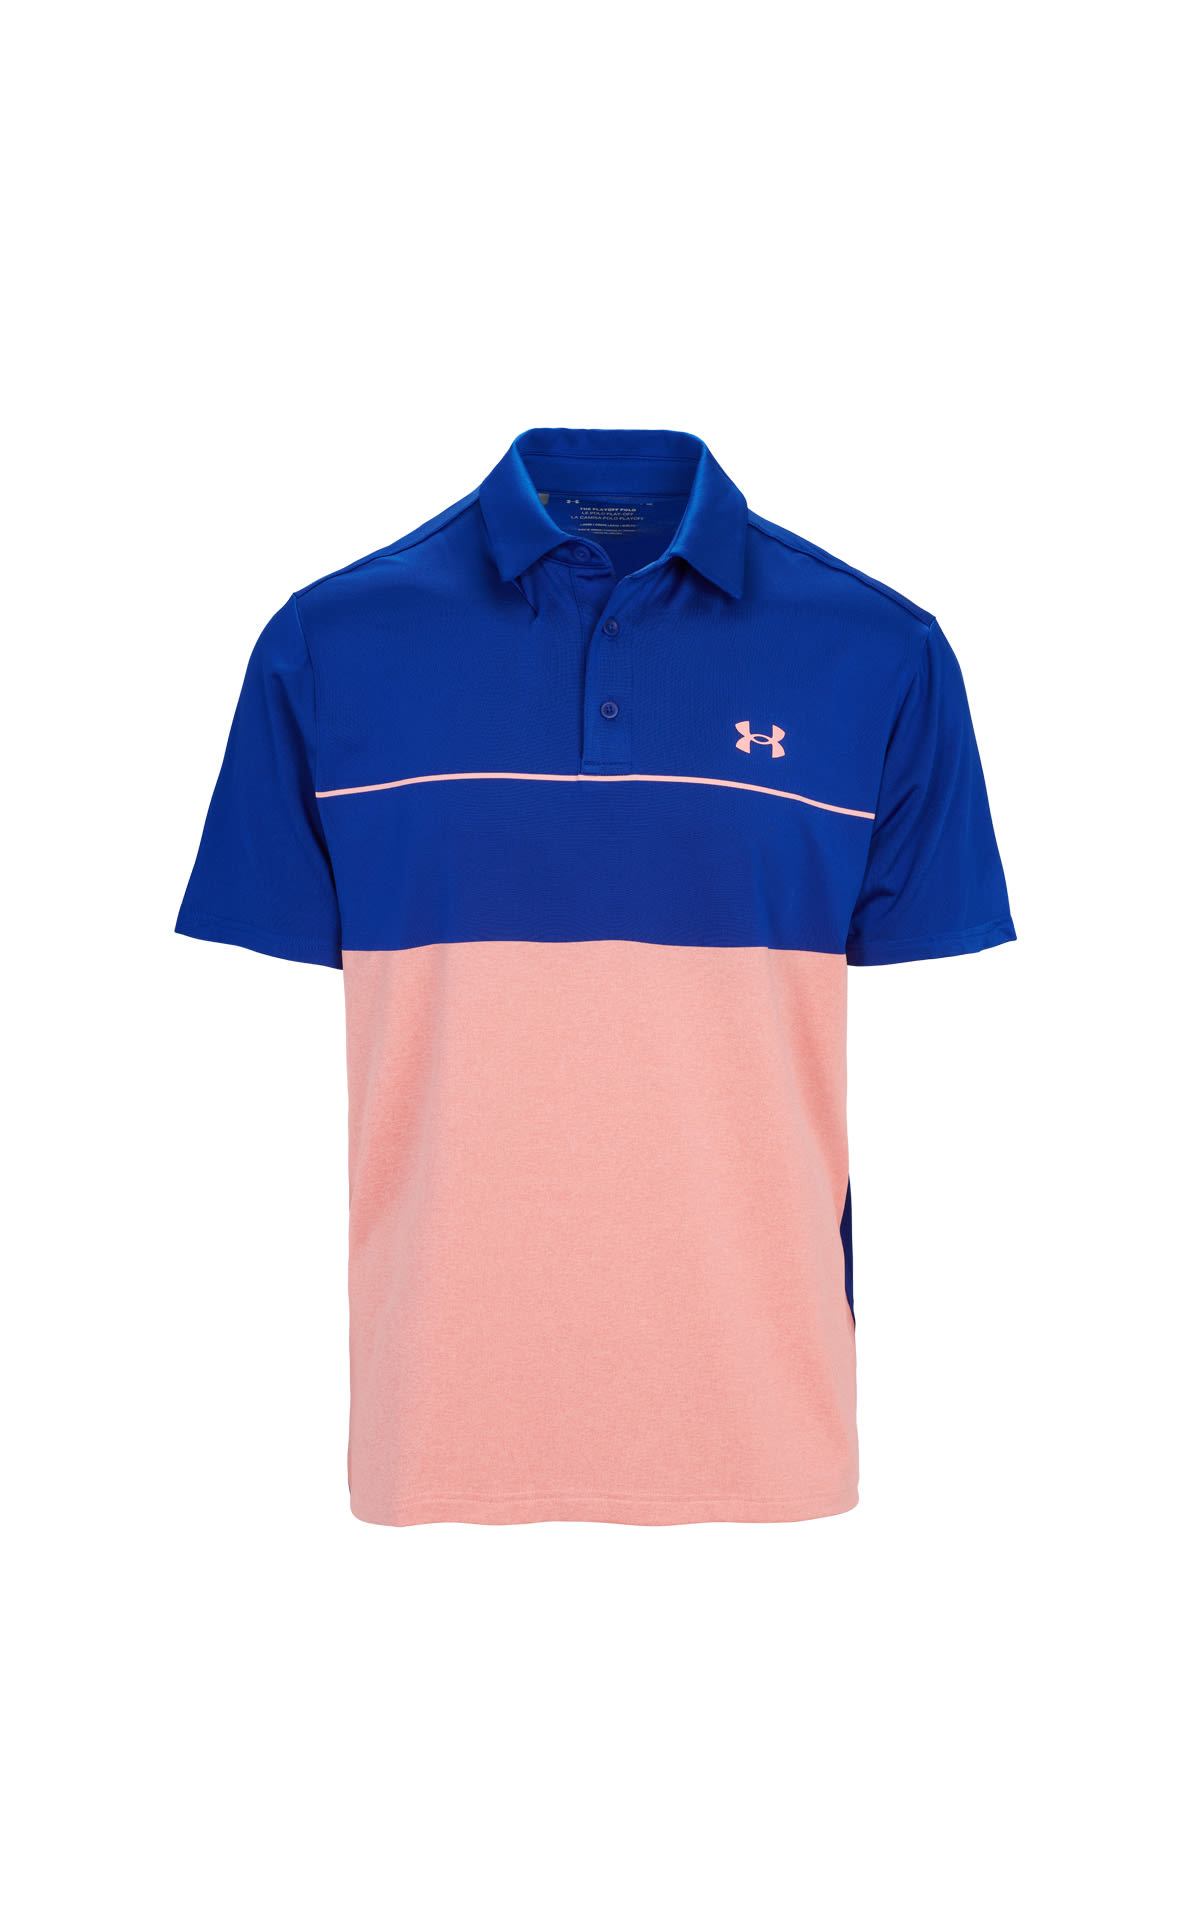 Blue and pink golf polo shirt Under Armour